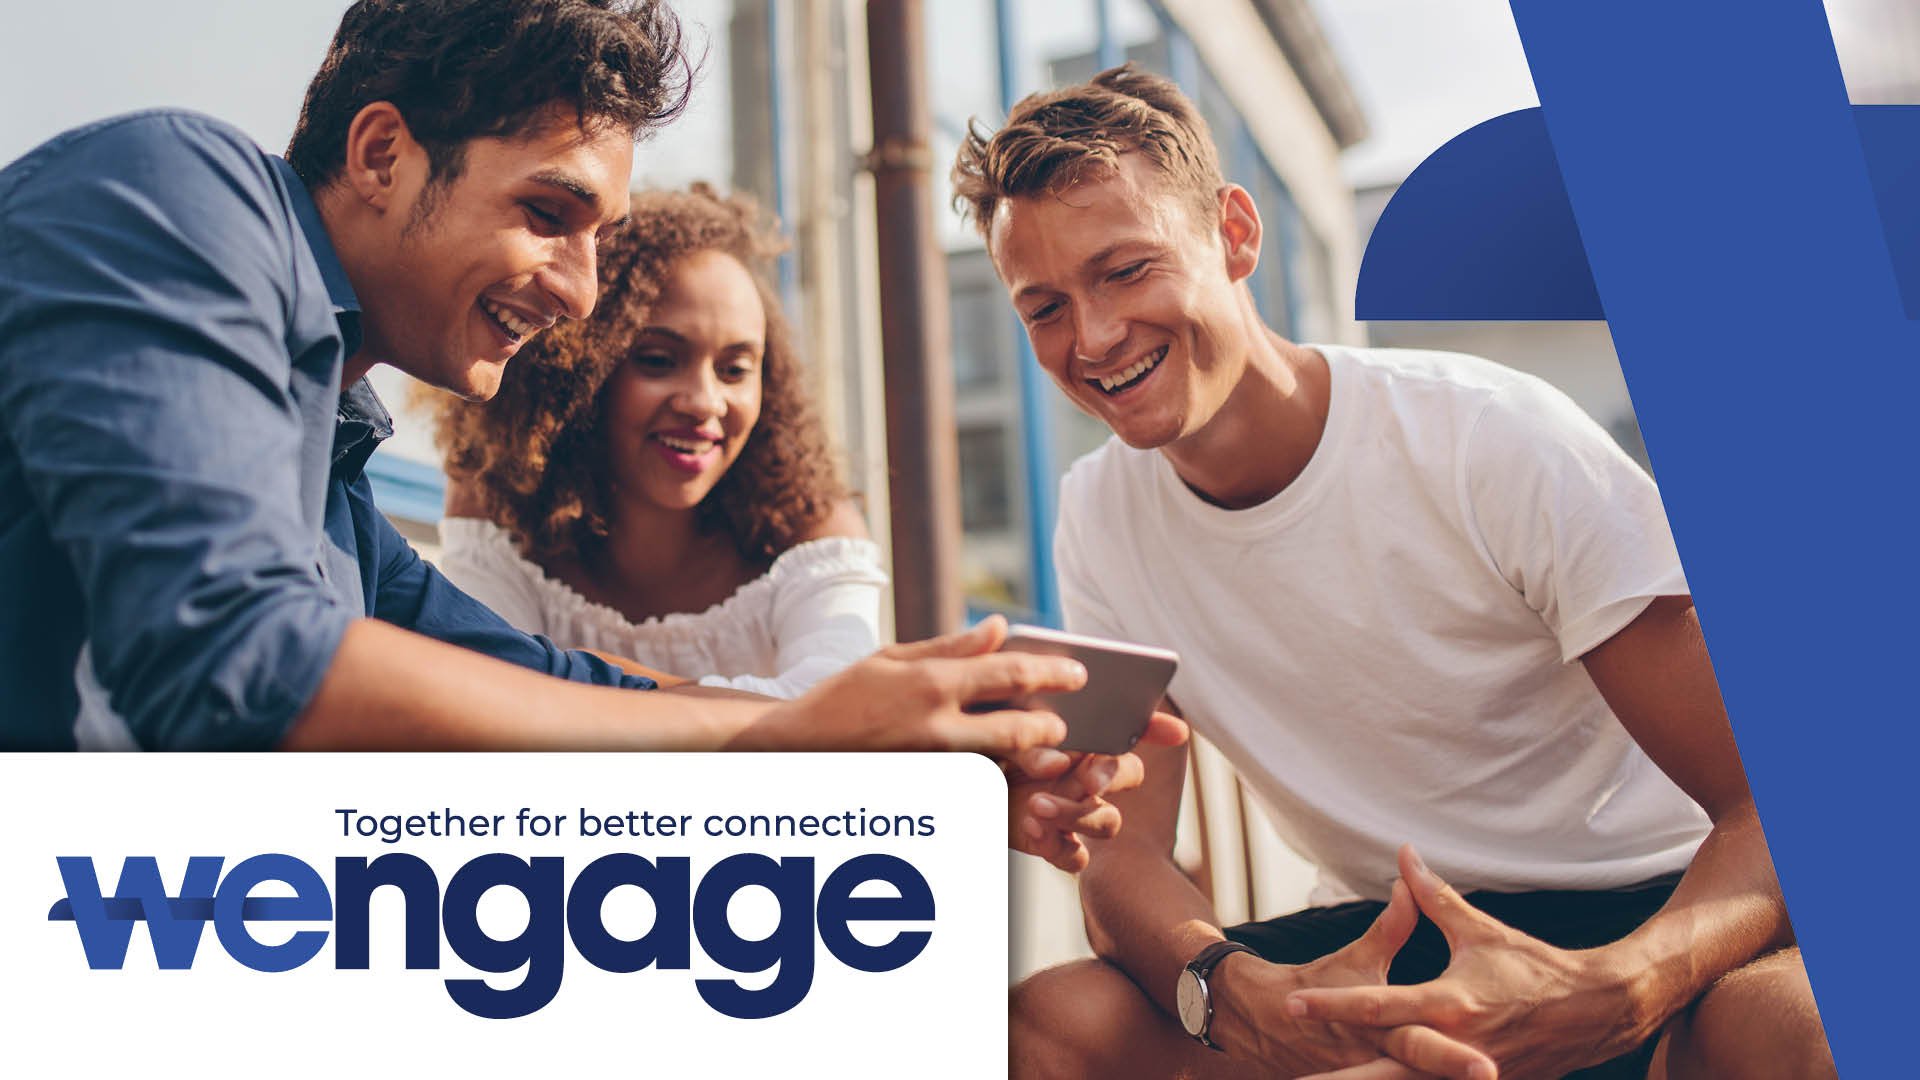 Wengage together for better connections visual Customer Contact nieuws CCBE.jpg